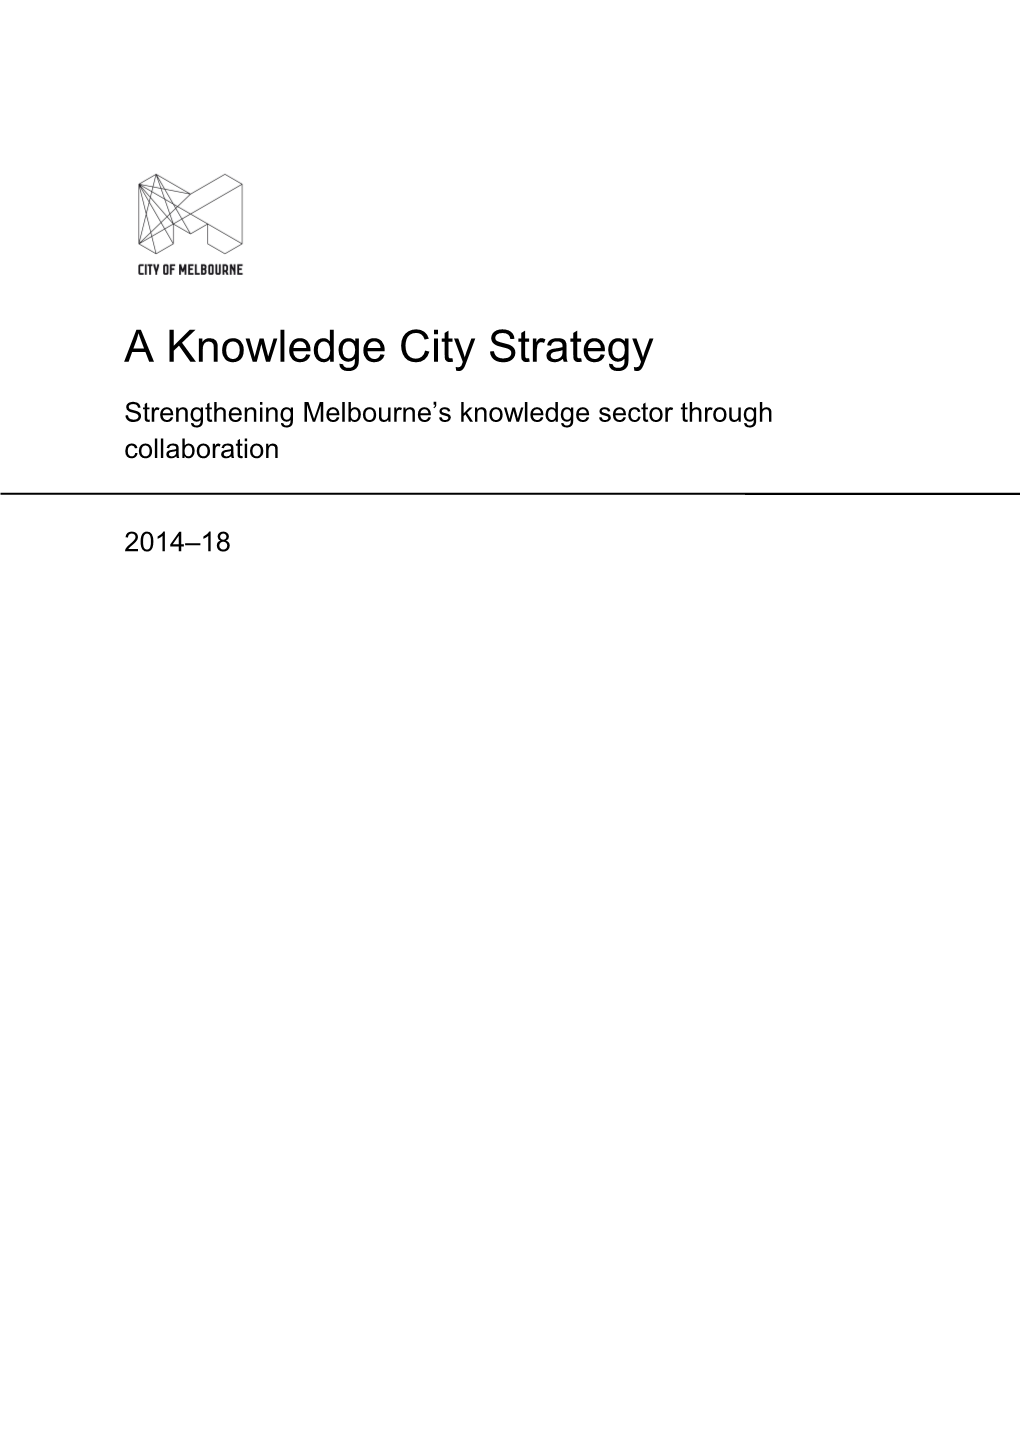 A Knowledge City Strategy: Strengthening Melbourne's Knowledge Sector Through Collaboration